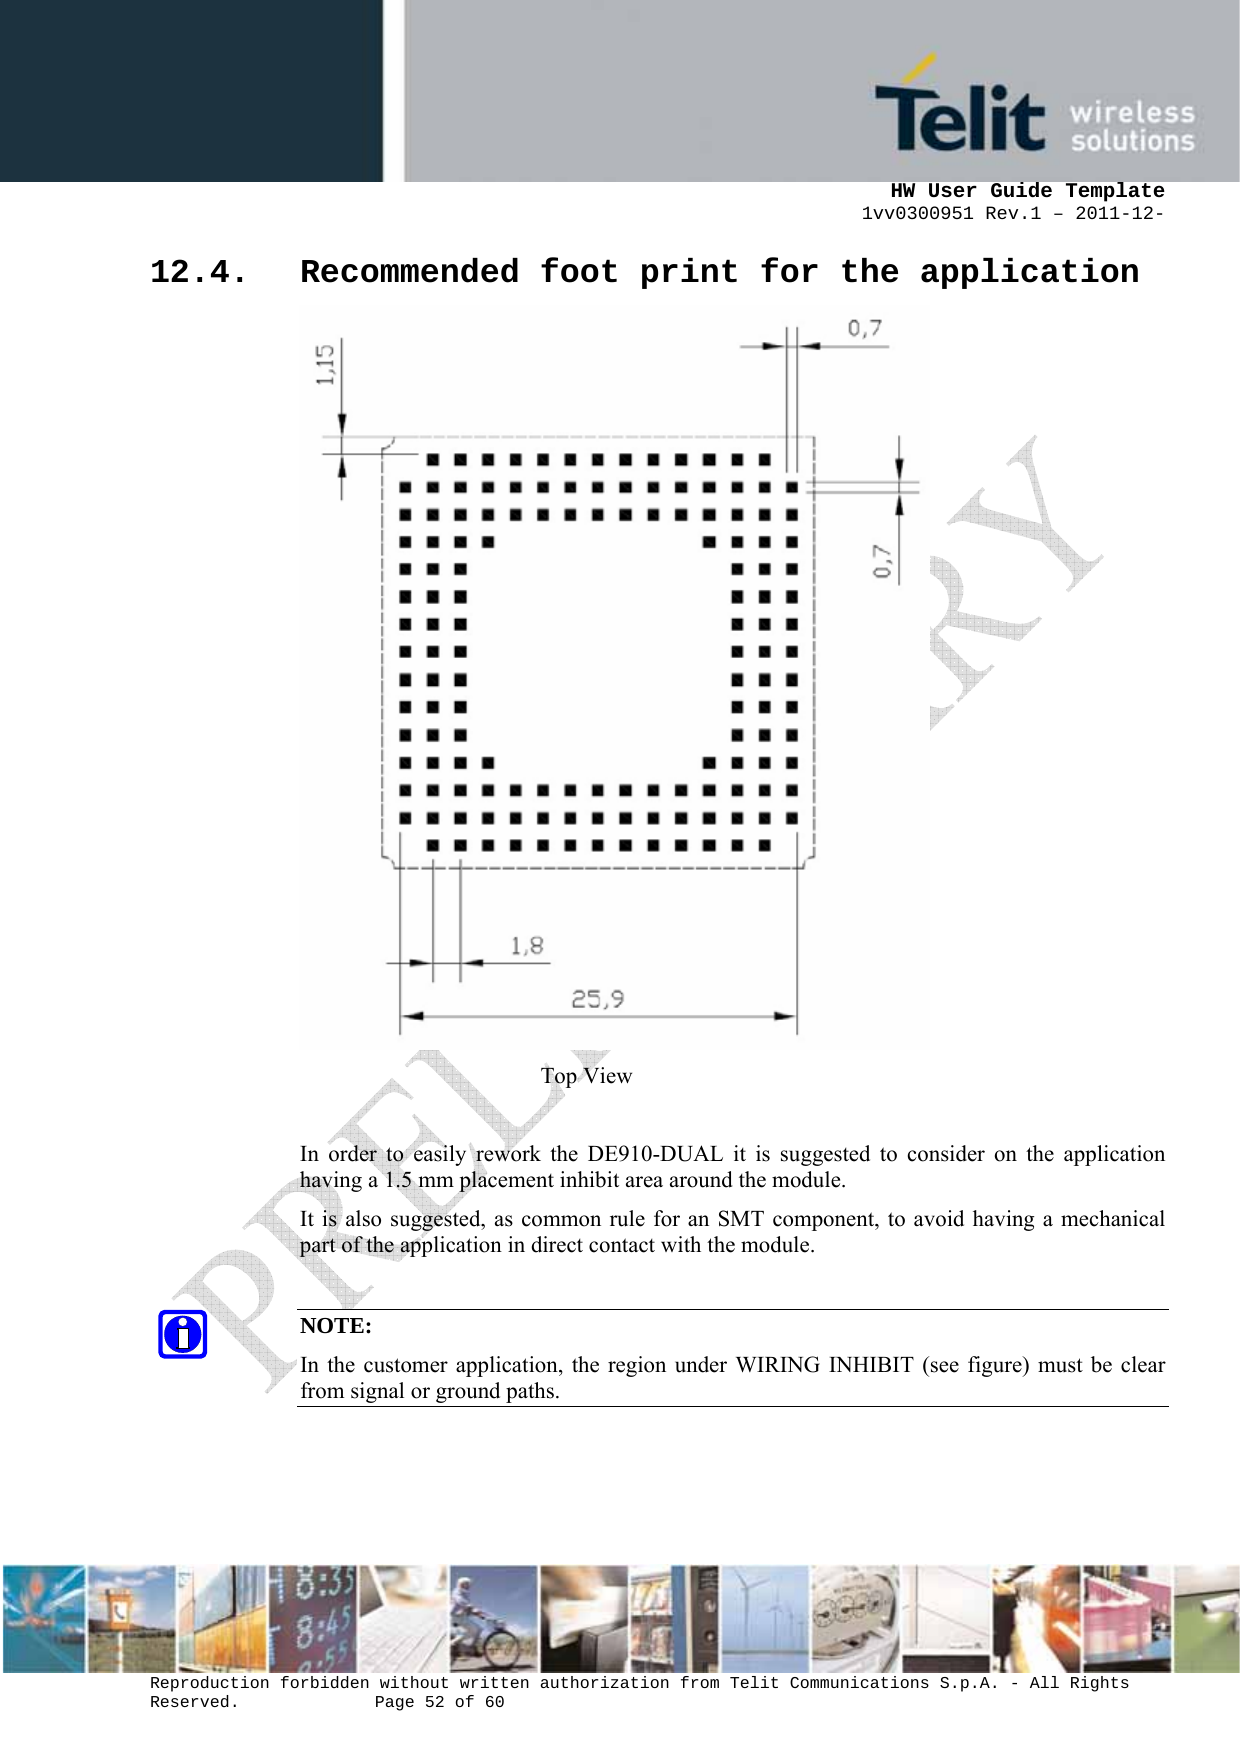      HW User Guide Template 1vv0300951 Rev.1 – 2011-12-  Reproduction forbidden without written authorization from Telit Communications S.p.A. - All Rights Reserved.    Page 52 of 60                                                     12.4. Recommended foot print for the application  Top View  In order to easily rework the DE910-DUAL it is suggested to consider on the application having a 1.5 mm placement inhibit area around the module.  It is also suggested, as common rule for an SMT component, to avoid having a mechanical part of the application in direct contact with the module.  NOTE: In the customer application, the region under WIRING INHIBIT (see figure) must be clear from signal or ground paths.    